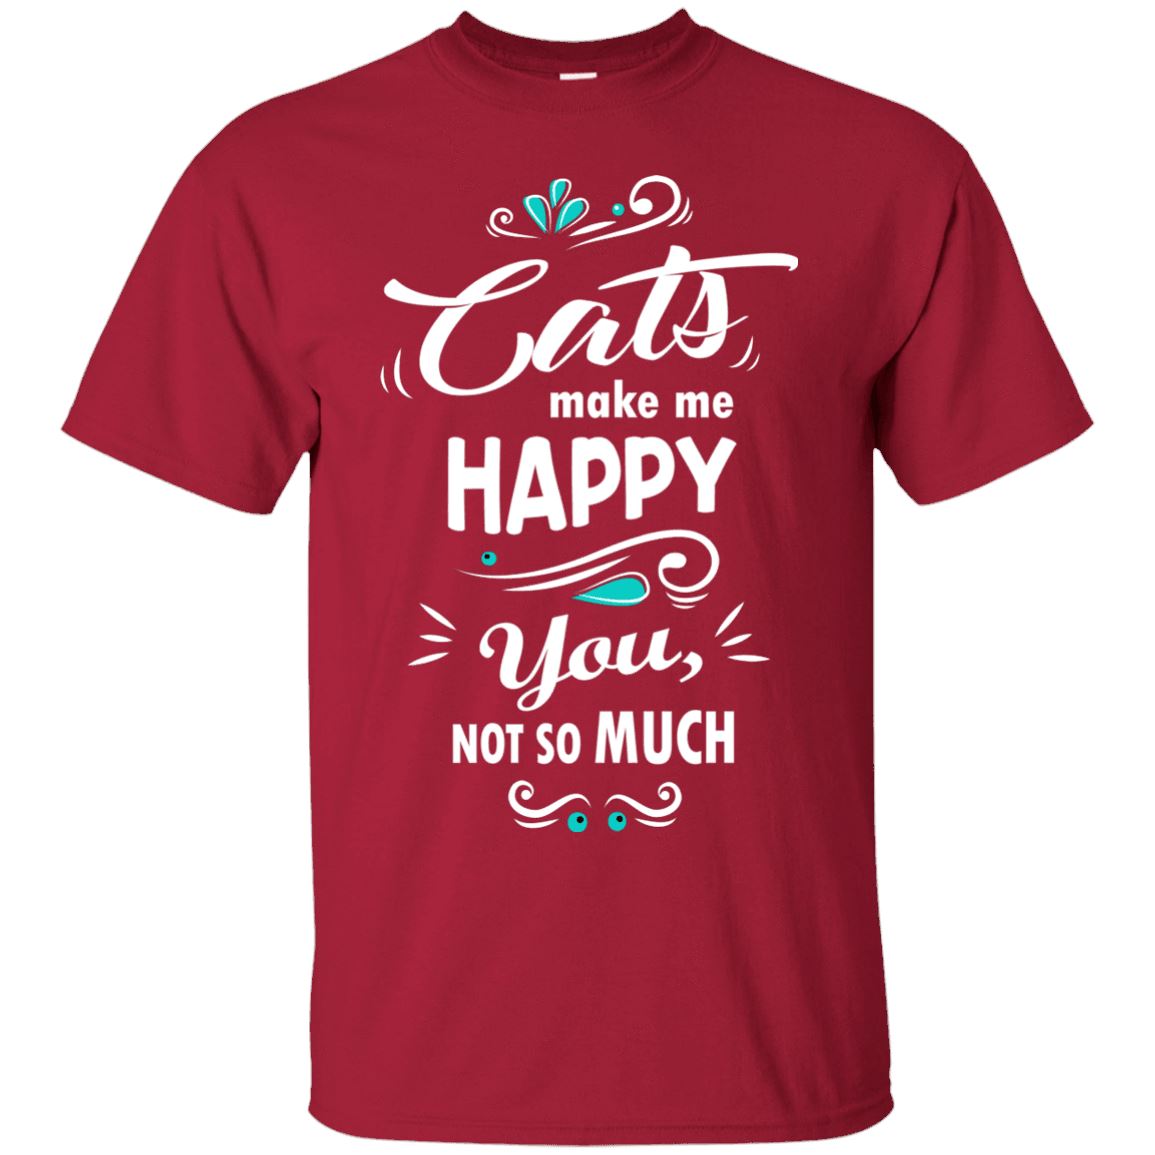 Cats Make Me Happy, You Not So Much - Cat Shirt